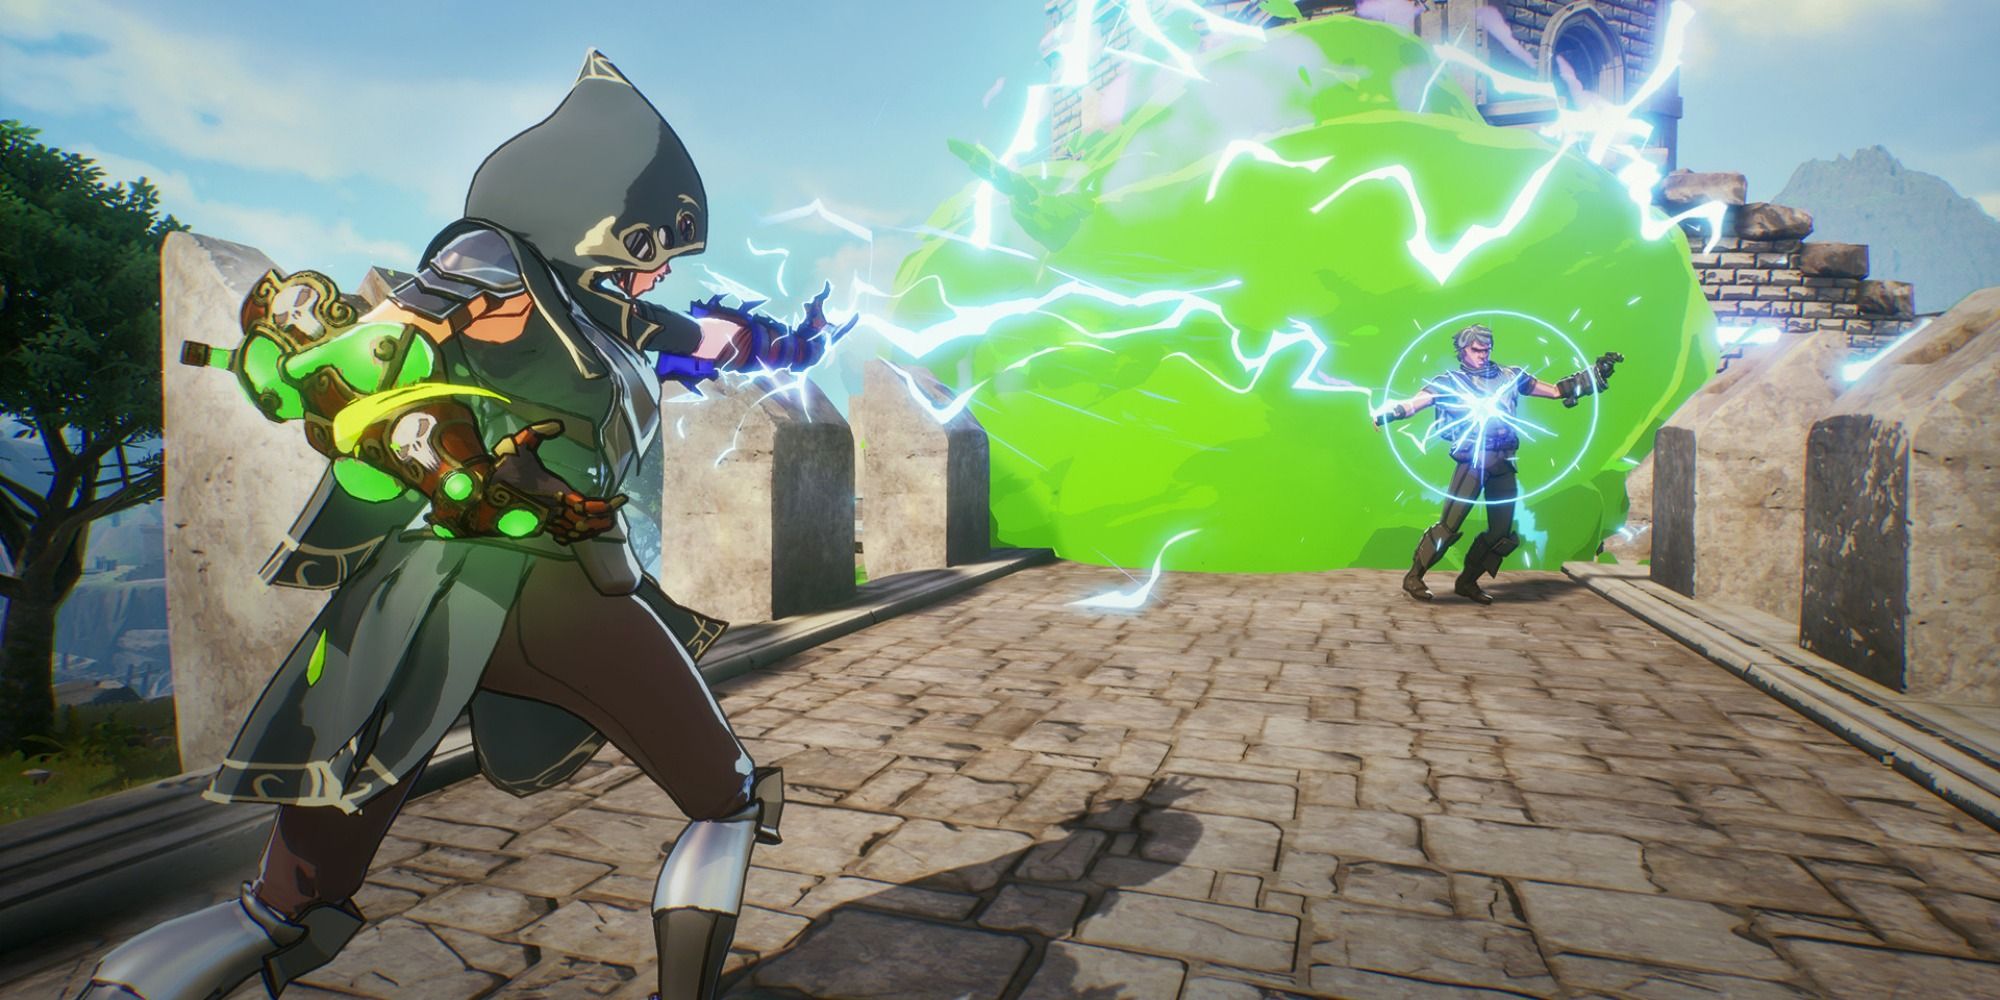 A fighter from Spellbreak uses a lightning gauntlet on a poison cloud to kill an enemy players